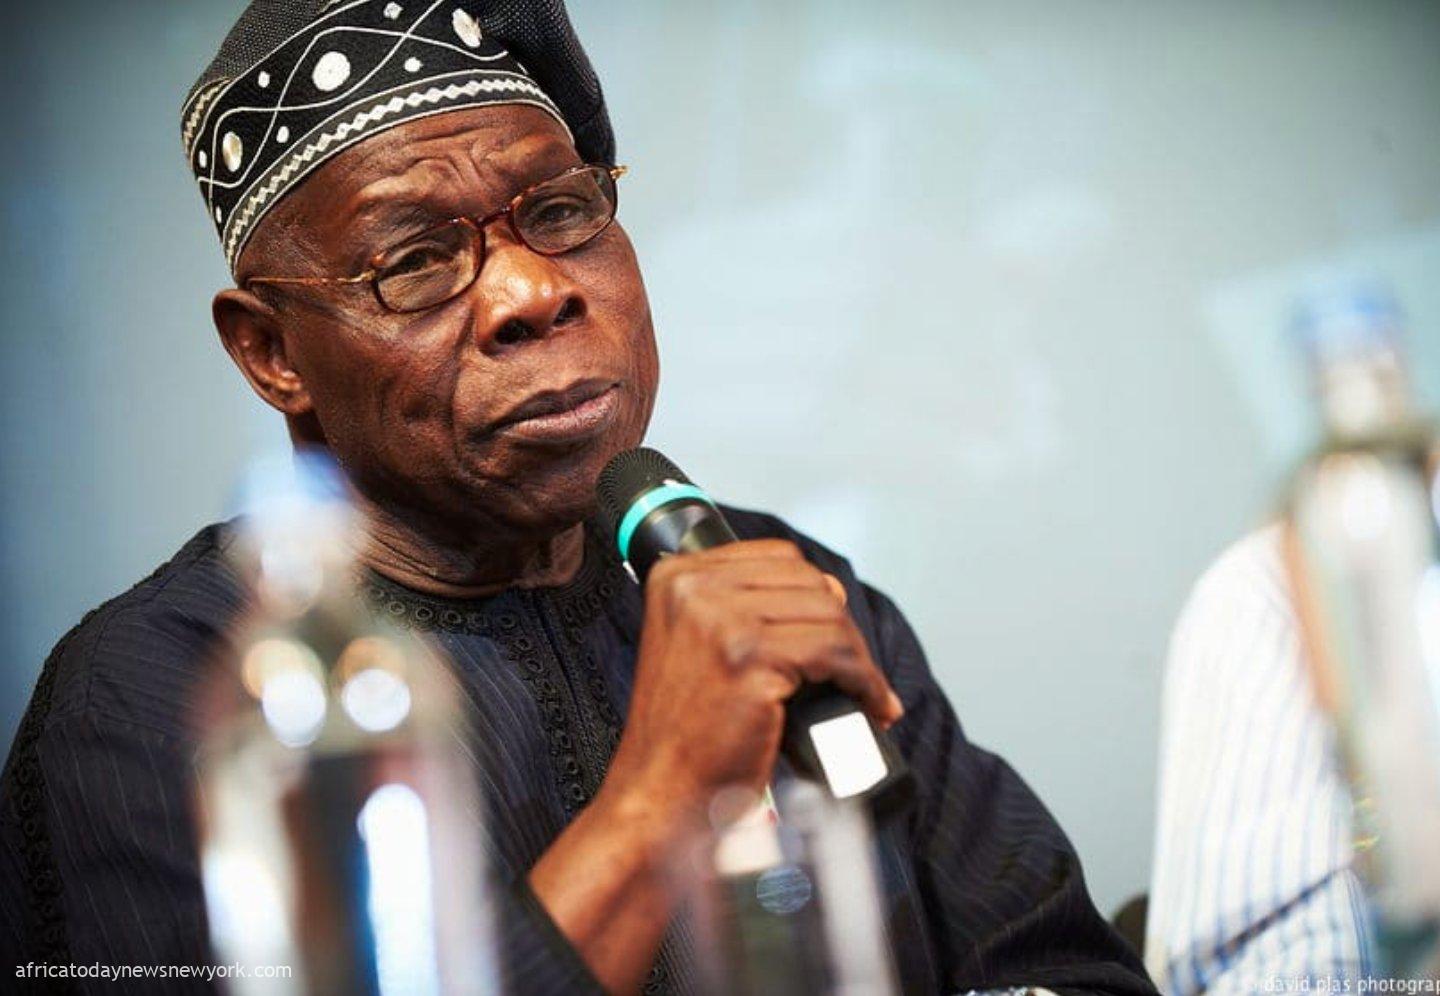 Nigeria’s Ugly Situation Can Be Changed - Obasanjo